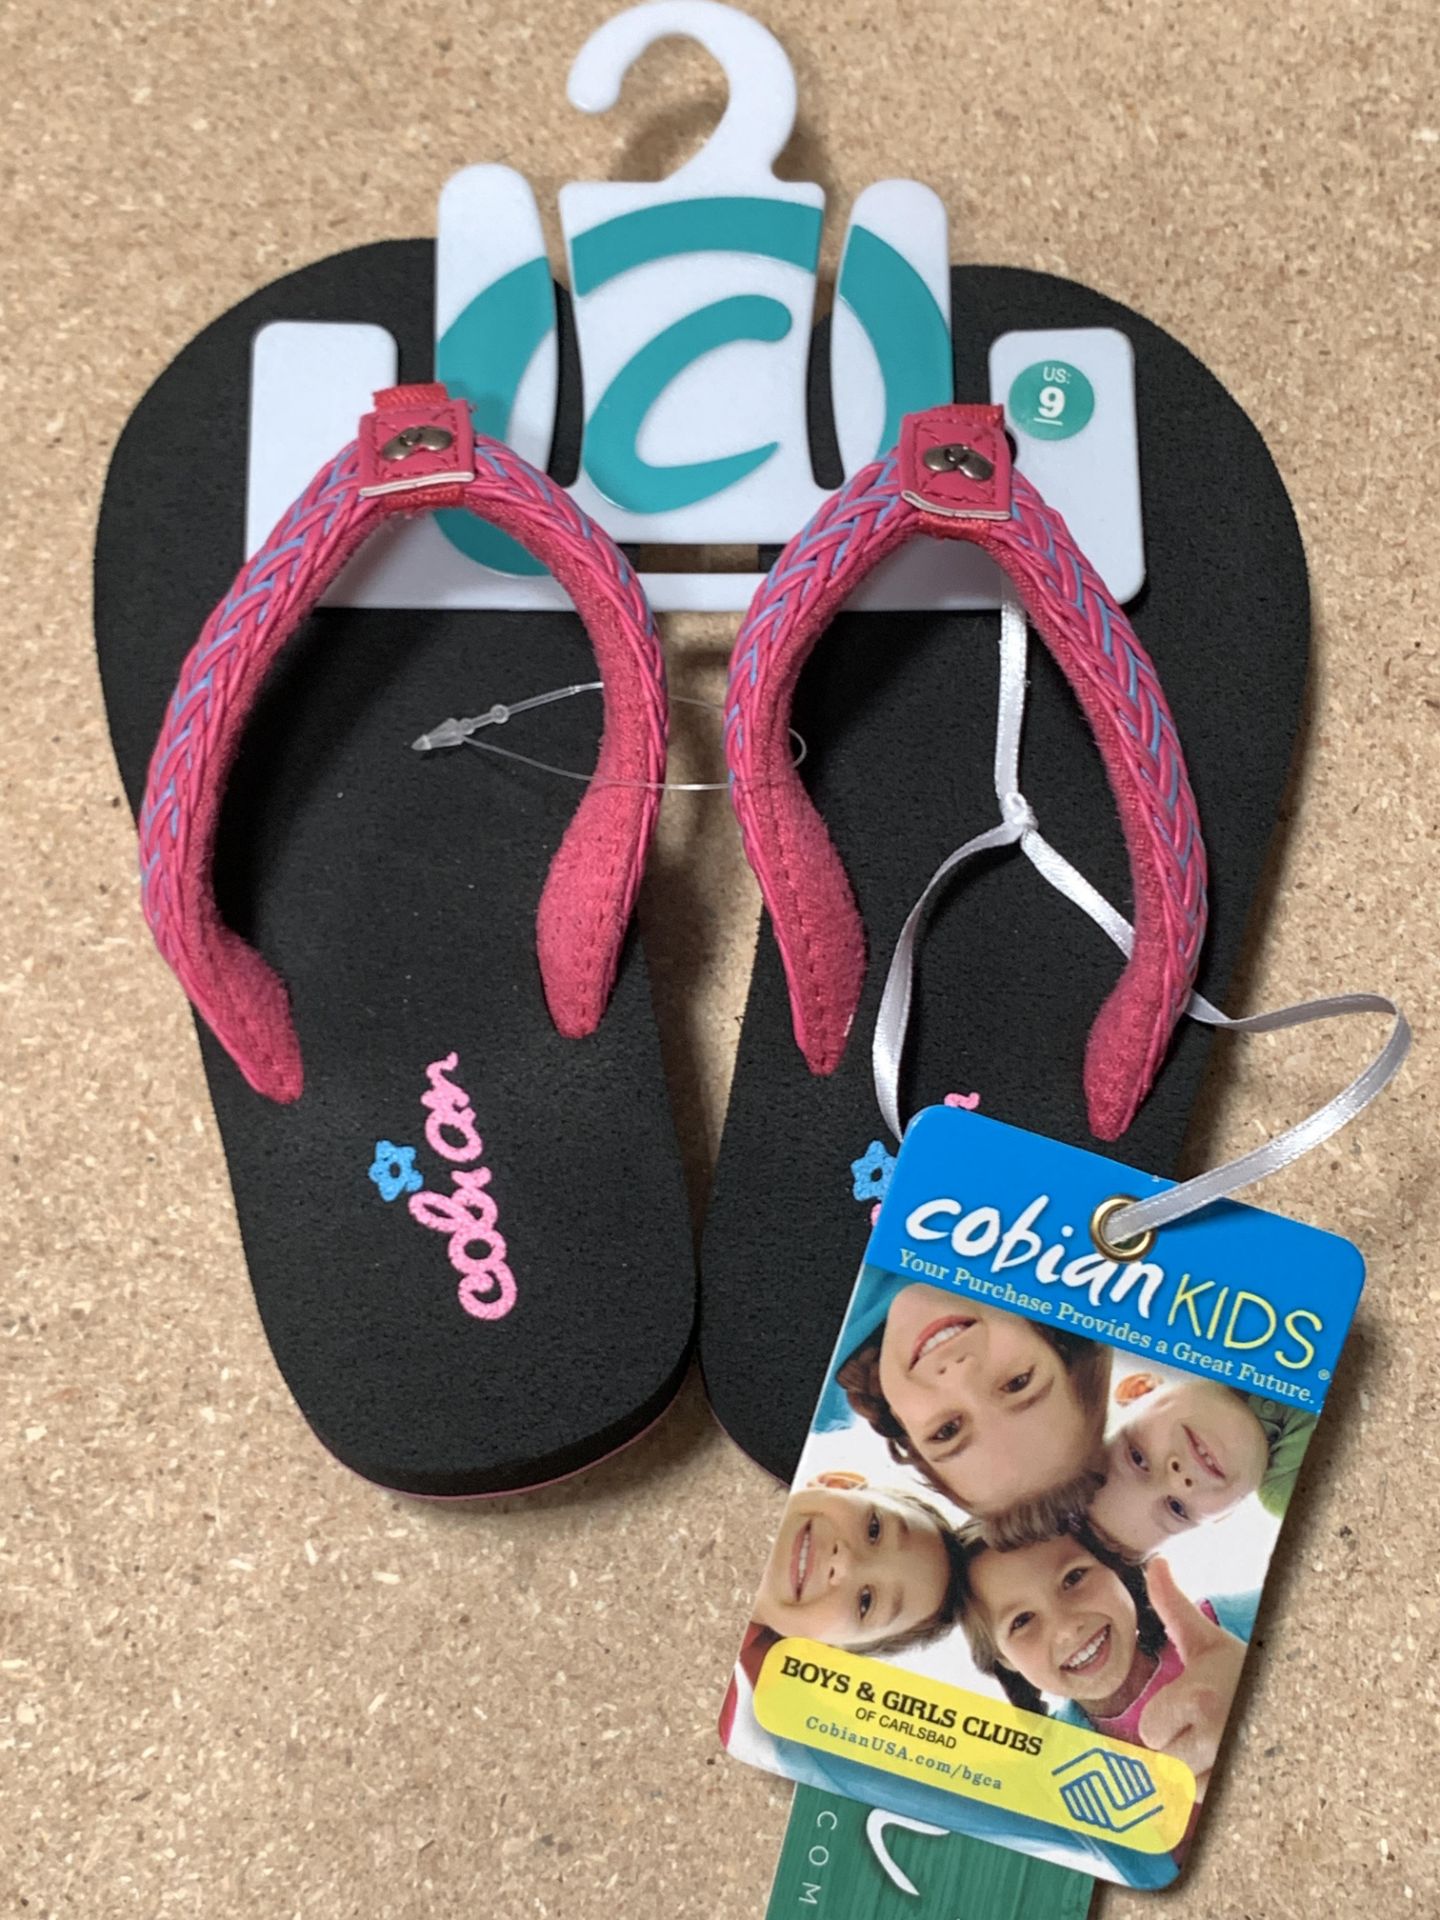 10 Pairs Cobian Kids Flip Flop Sandals, Lil Shimmer &Lil Lalati, New, Various Sizes (Retail $240) - Image 5 of 8